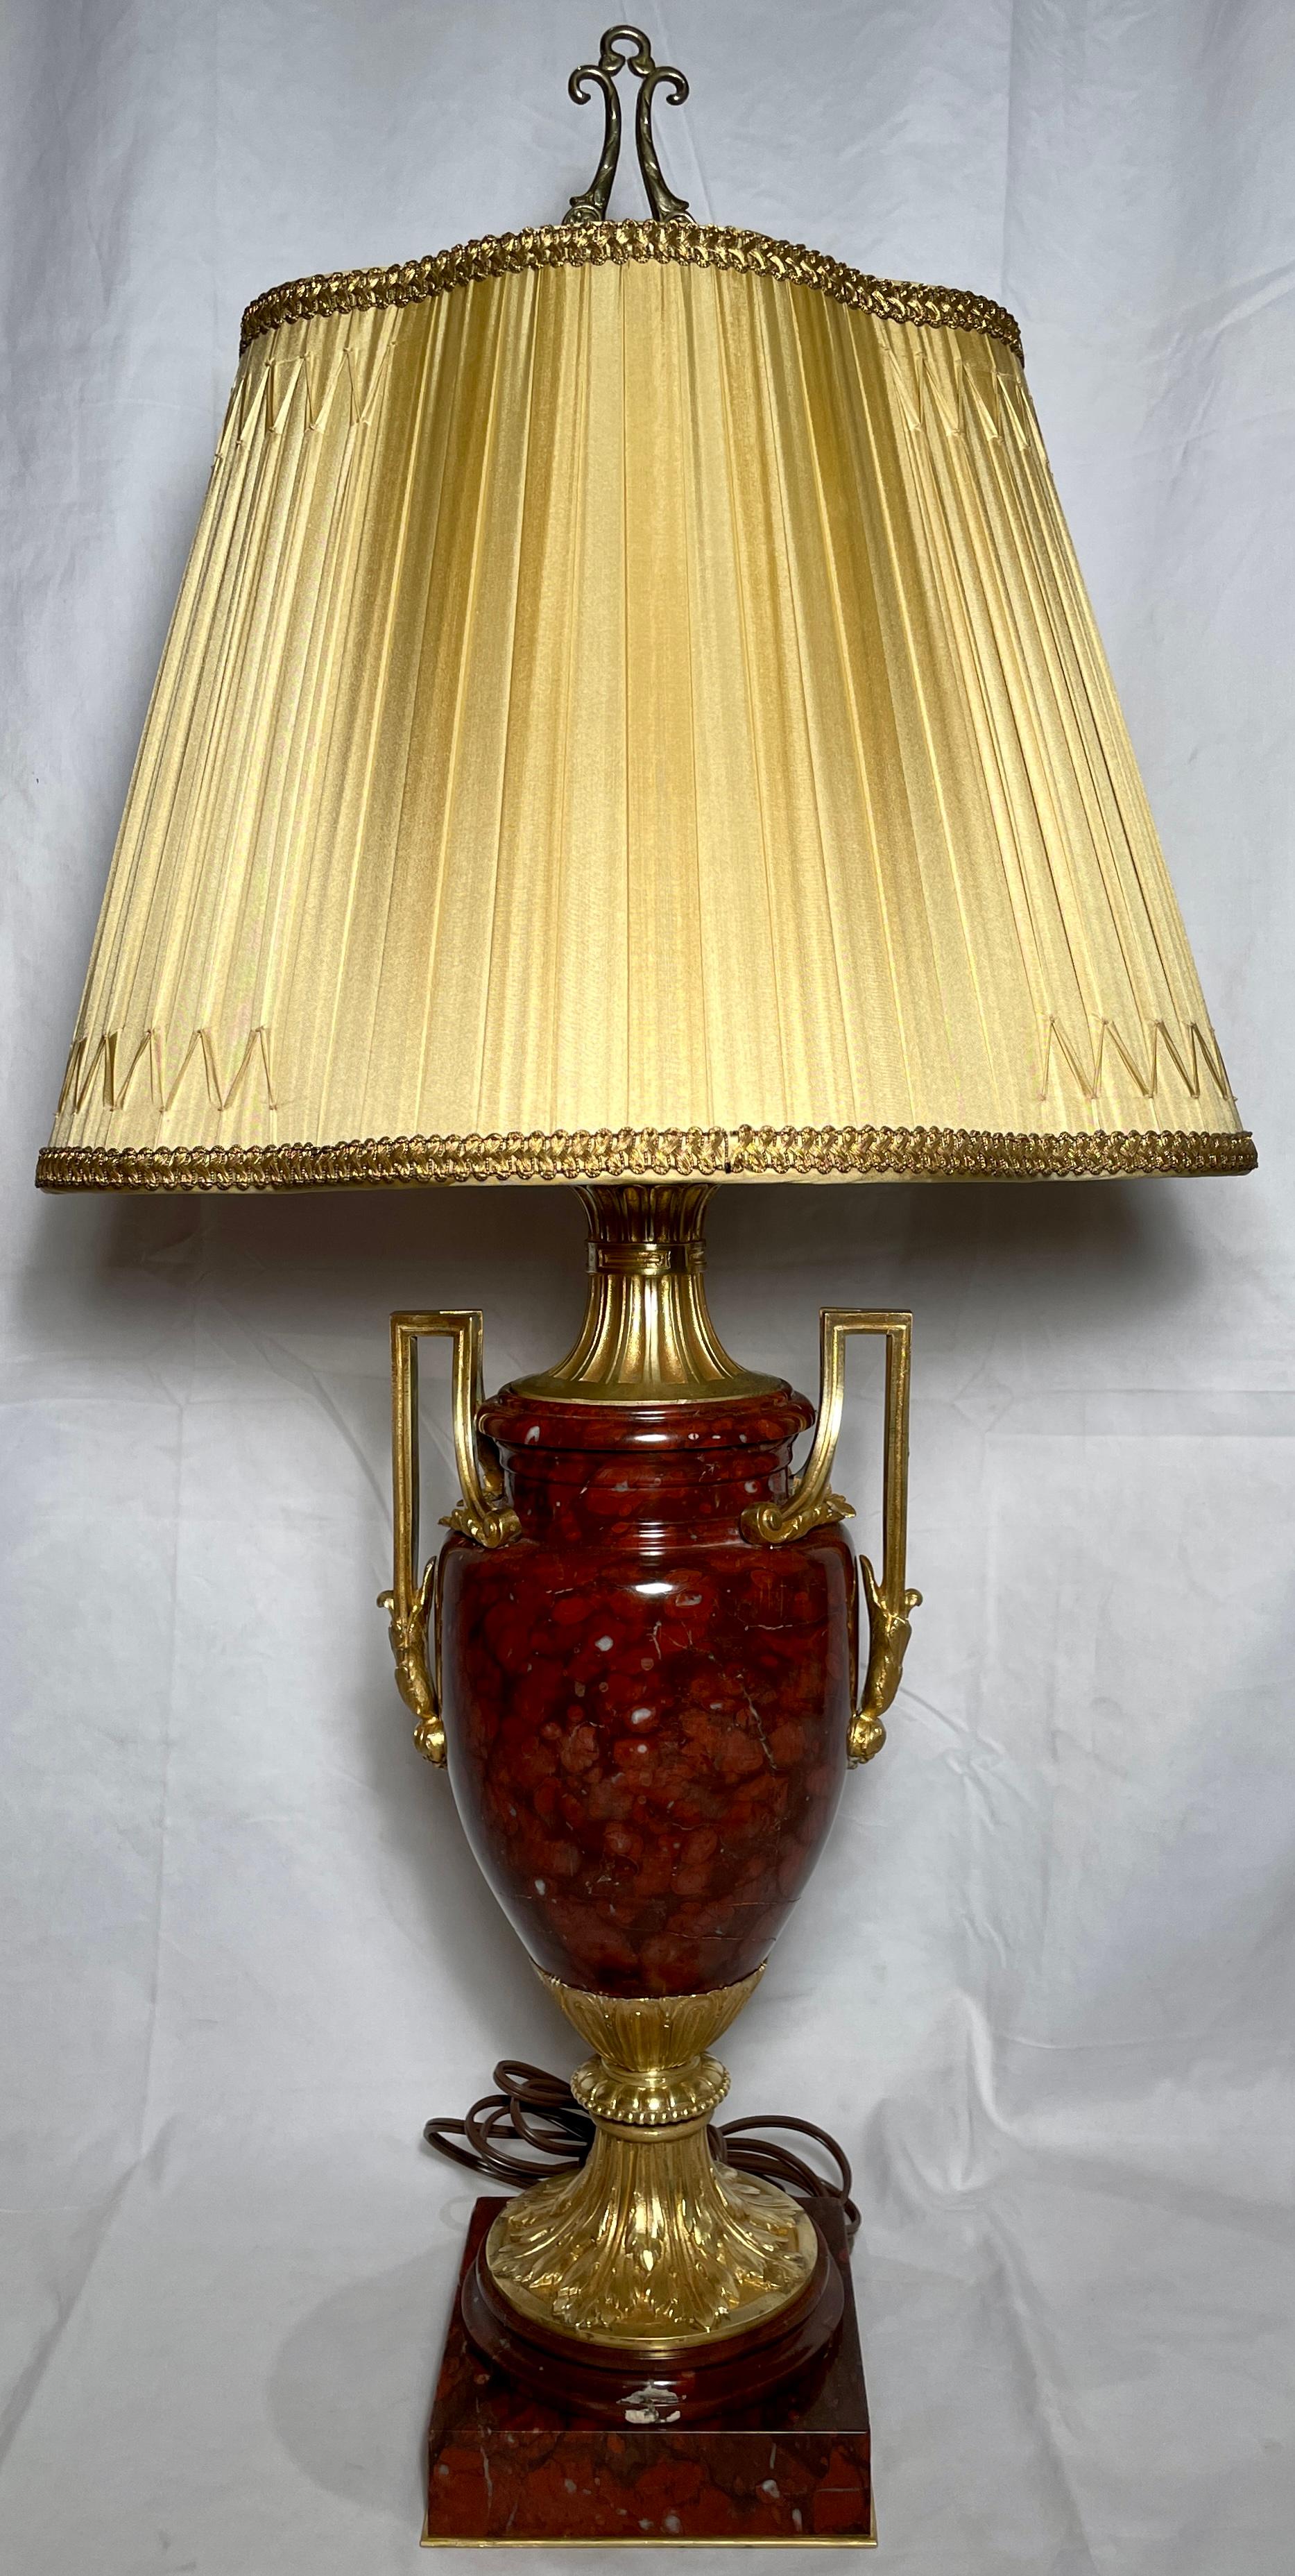 Pair antique French Napoleon III Classic style red marble and ormolu mounted lamps with handmade silk shades, circa 1875-1885.